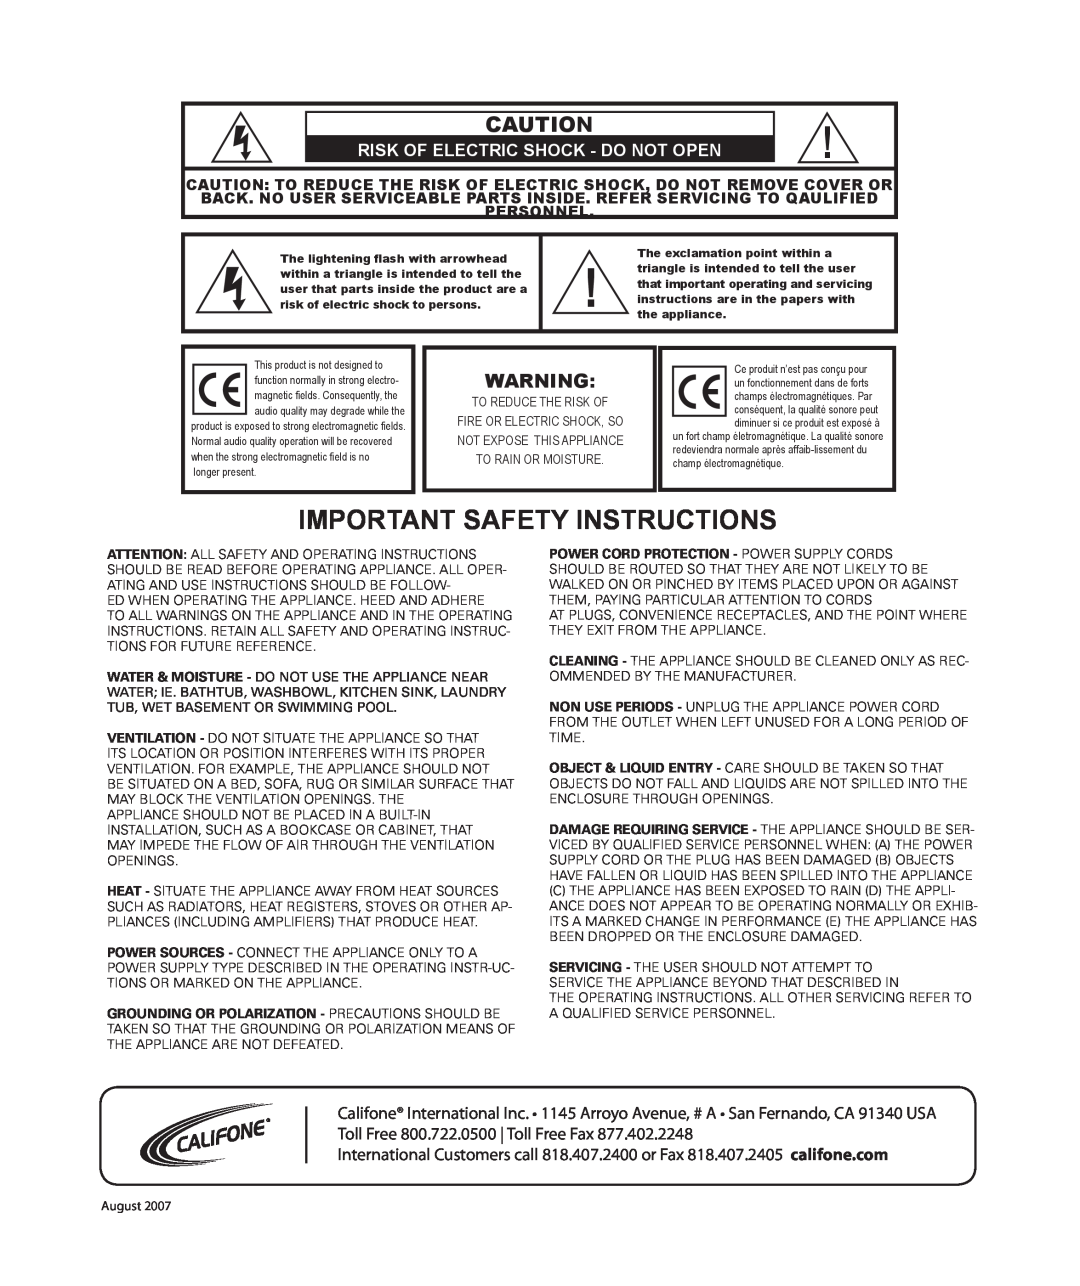 Califone LP-1 owner manual Important Safety Instructions, Risk Of Electric Shock - Do Not Open 